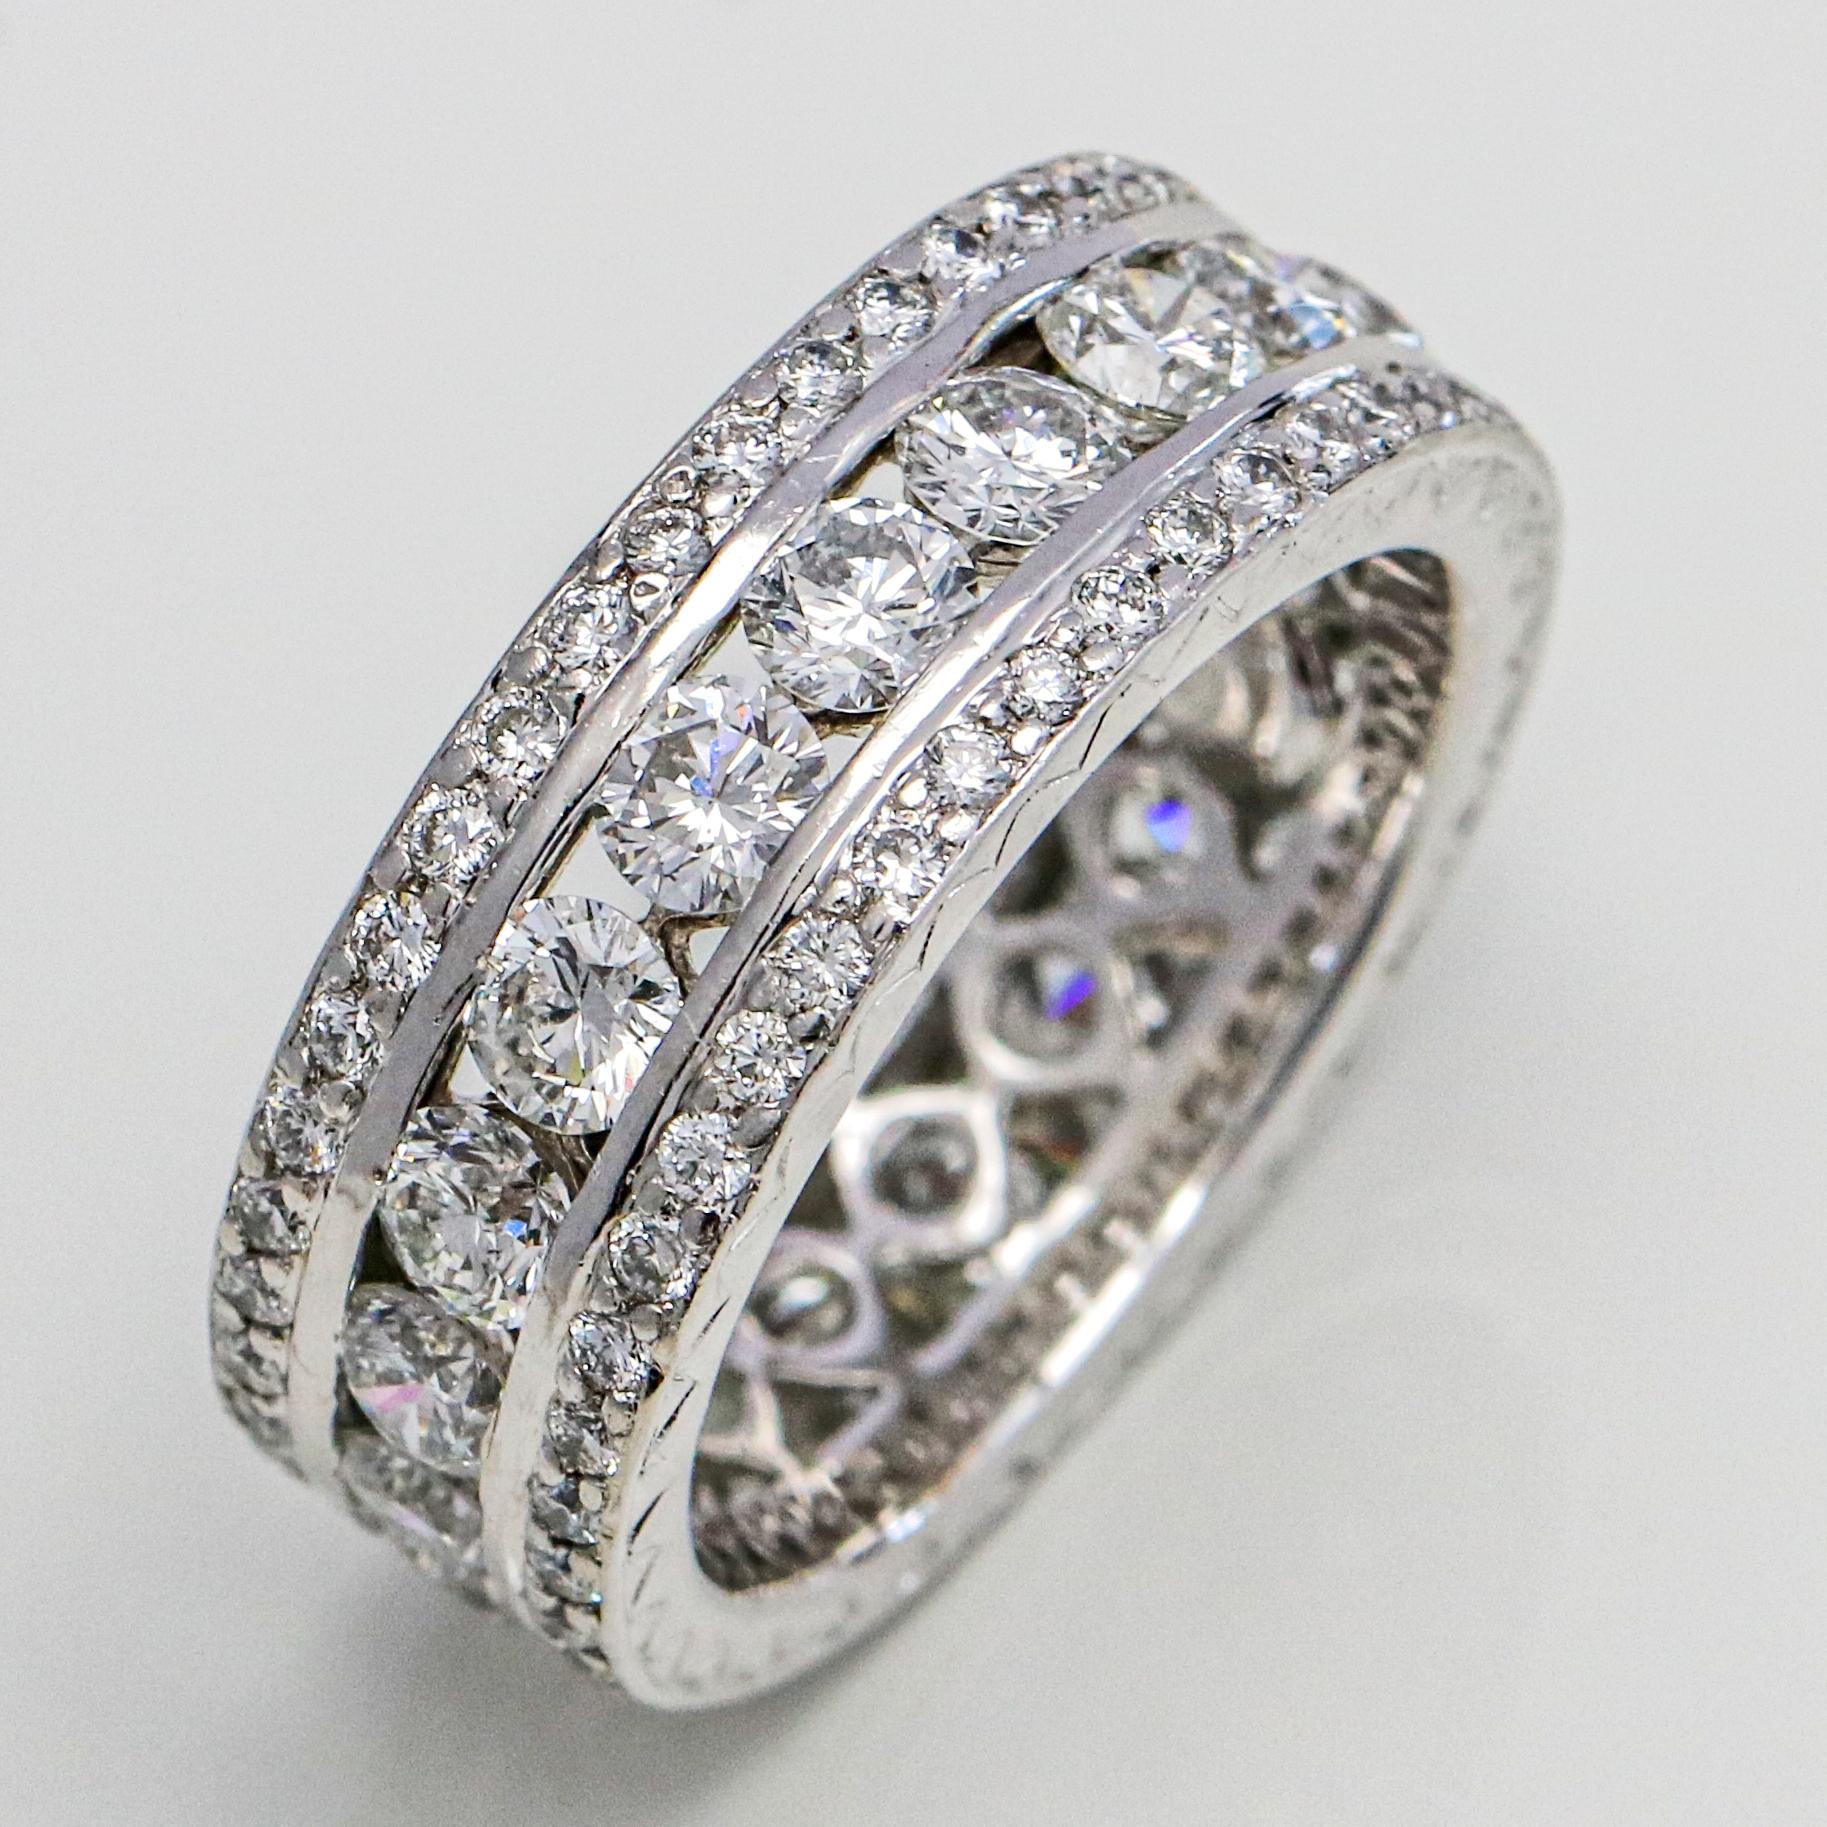 Three row diamond eternity band in platinum. The ring has a row of bezel set diamonds, and two rows of smaller prong set diamonds. 

Size, 5.25
Width, 8 mm
Total Carat Weight, 3.39 carats
Diamond Color and Clarity, VS, G-H
Weight, 9 grams 